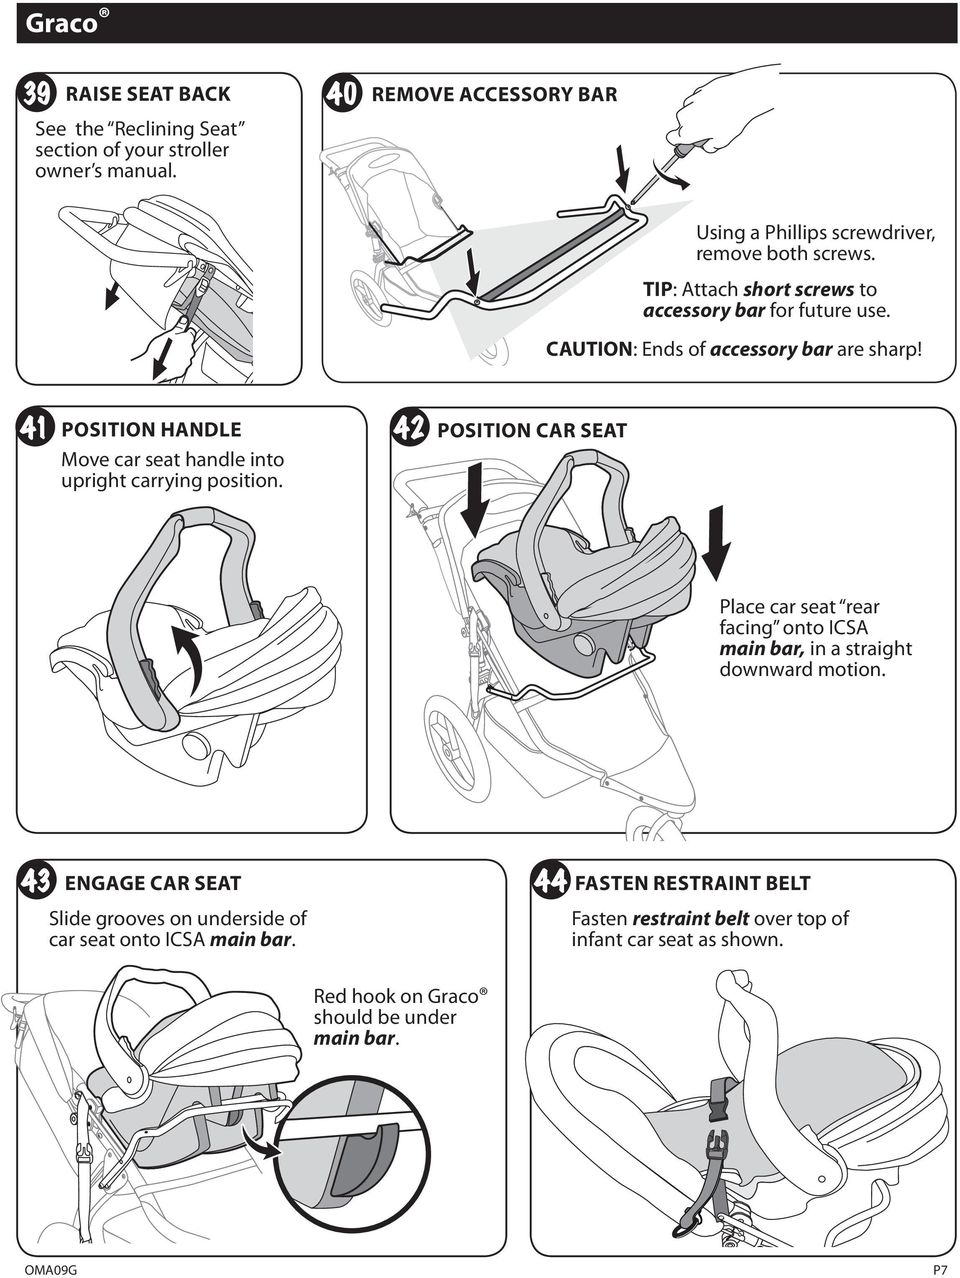 POSITION HANDLE Move car seat handle into upright carrying position.